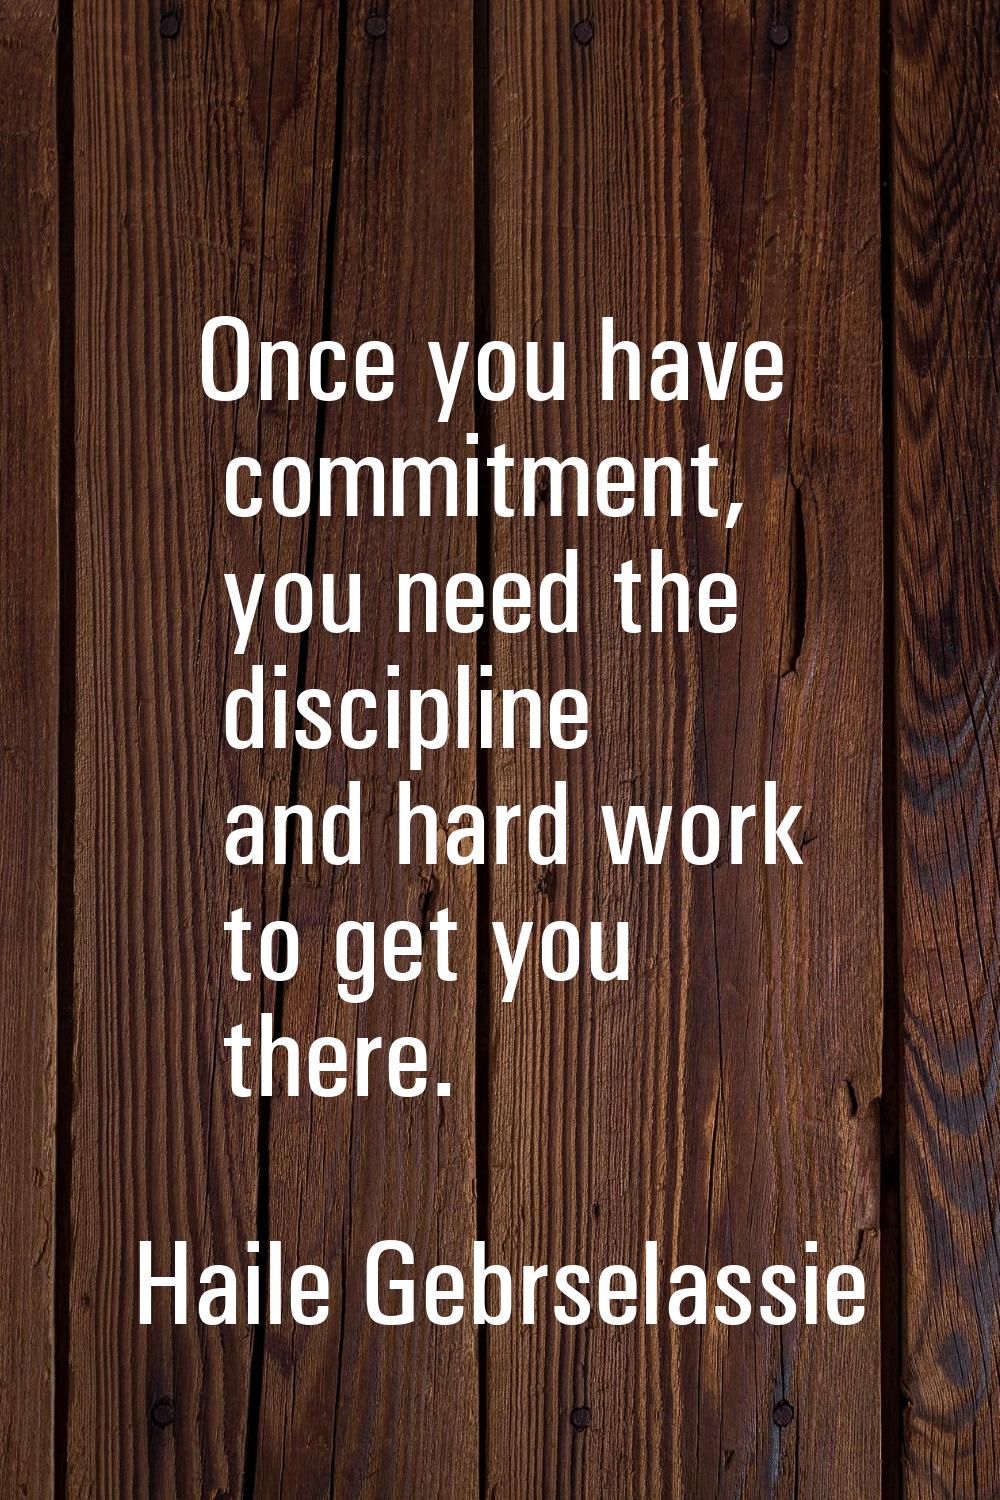 Once you have commitment, you need the discipline and hard work to get you there.